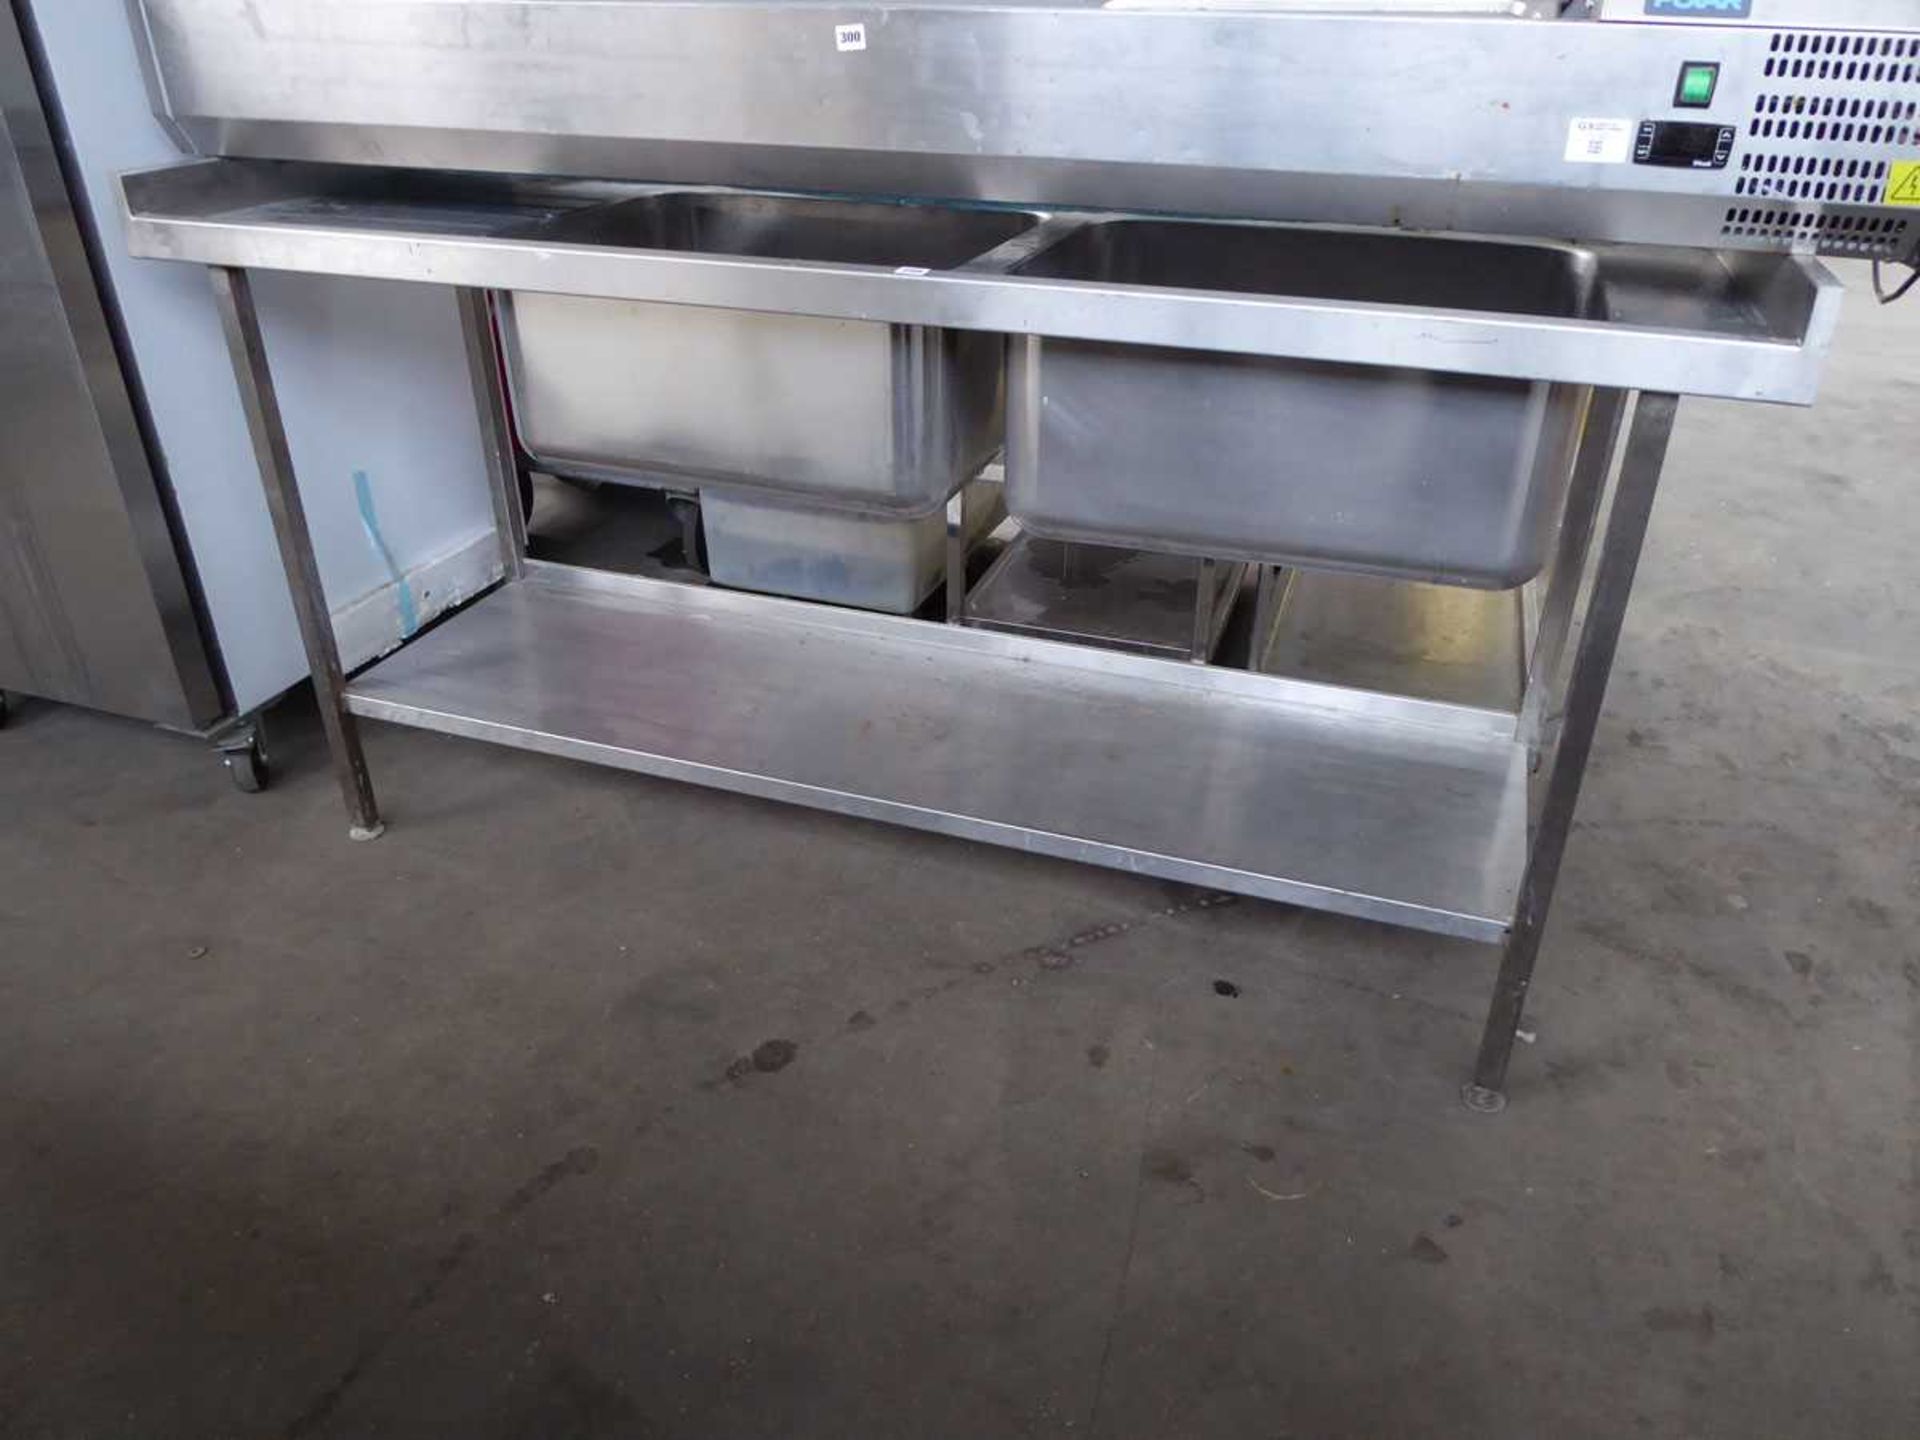 +VAT 185cm stainless steel double bowl sink unit with drainer and shelf under